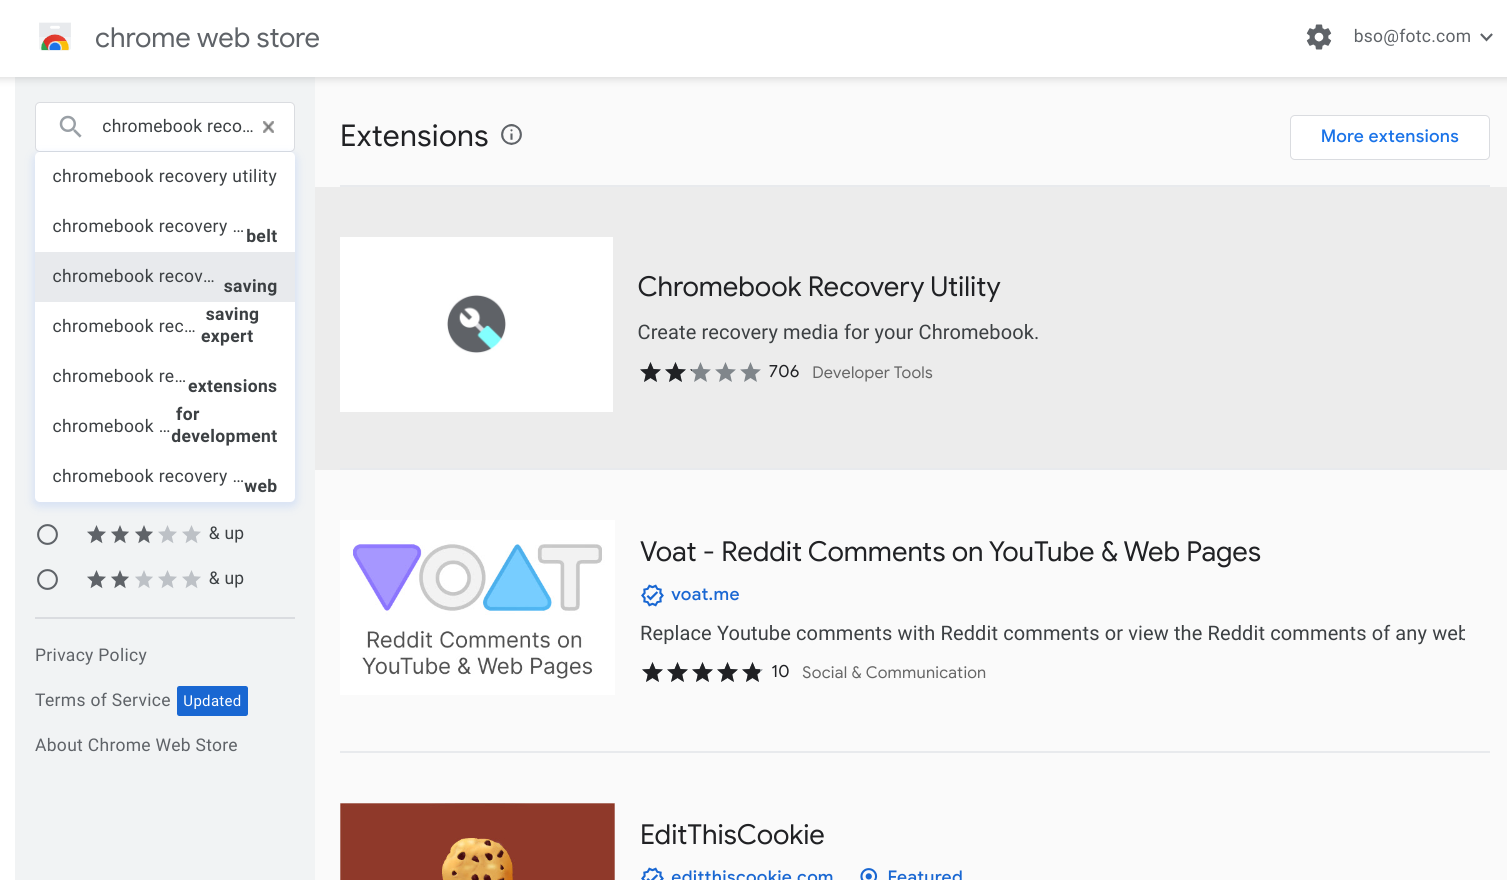 Search results for Chromebook Recovery Utility in Chrome Web Store